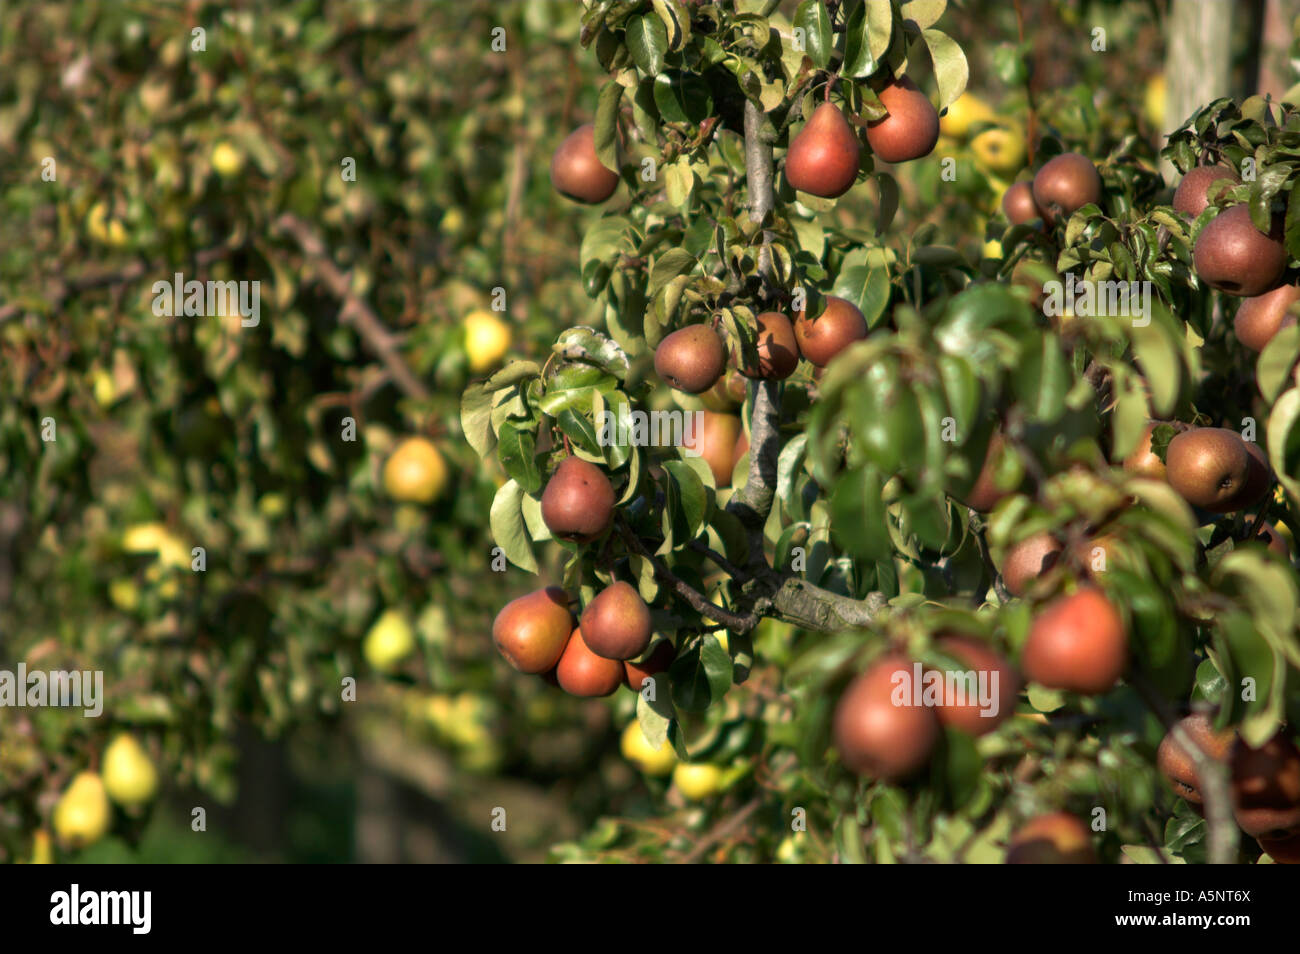 Red Beurre Hardy pears. Brogdale Horticultural Trust, Faversham, Kent, England. Stock Photo